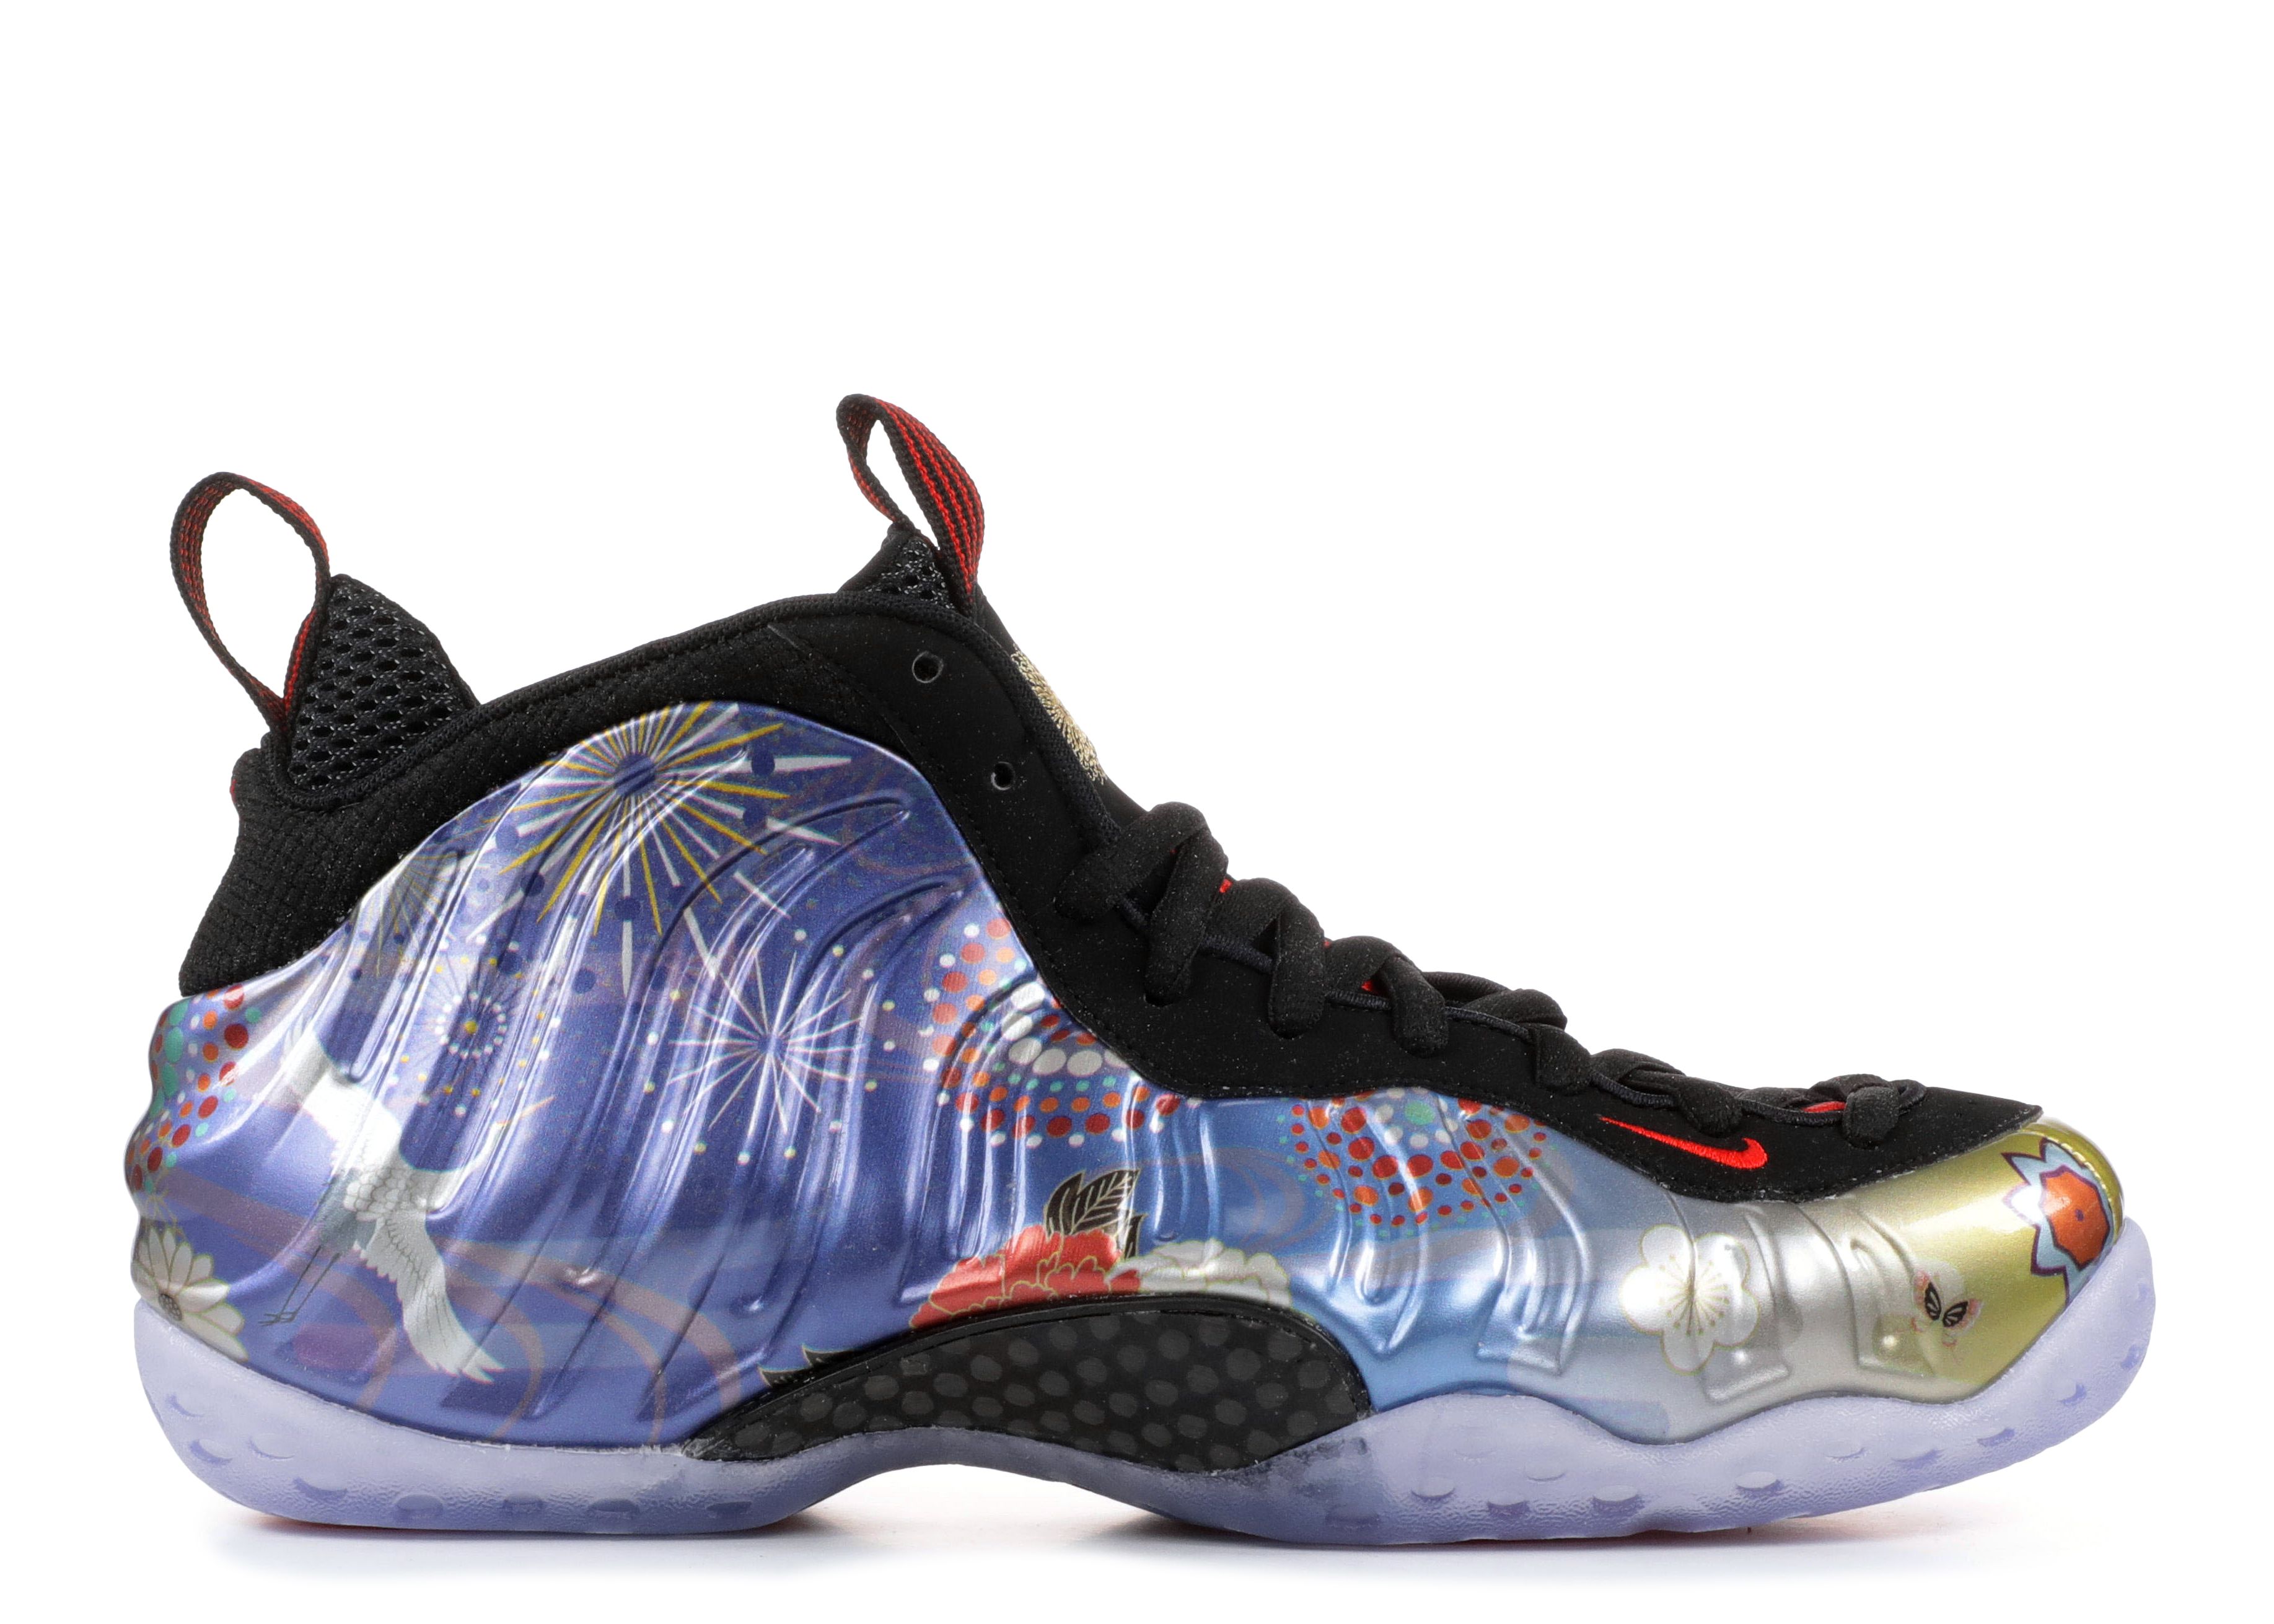 Nike Air Foamposite Pro Colorways, Release Dates, Pricing